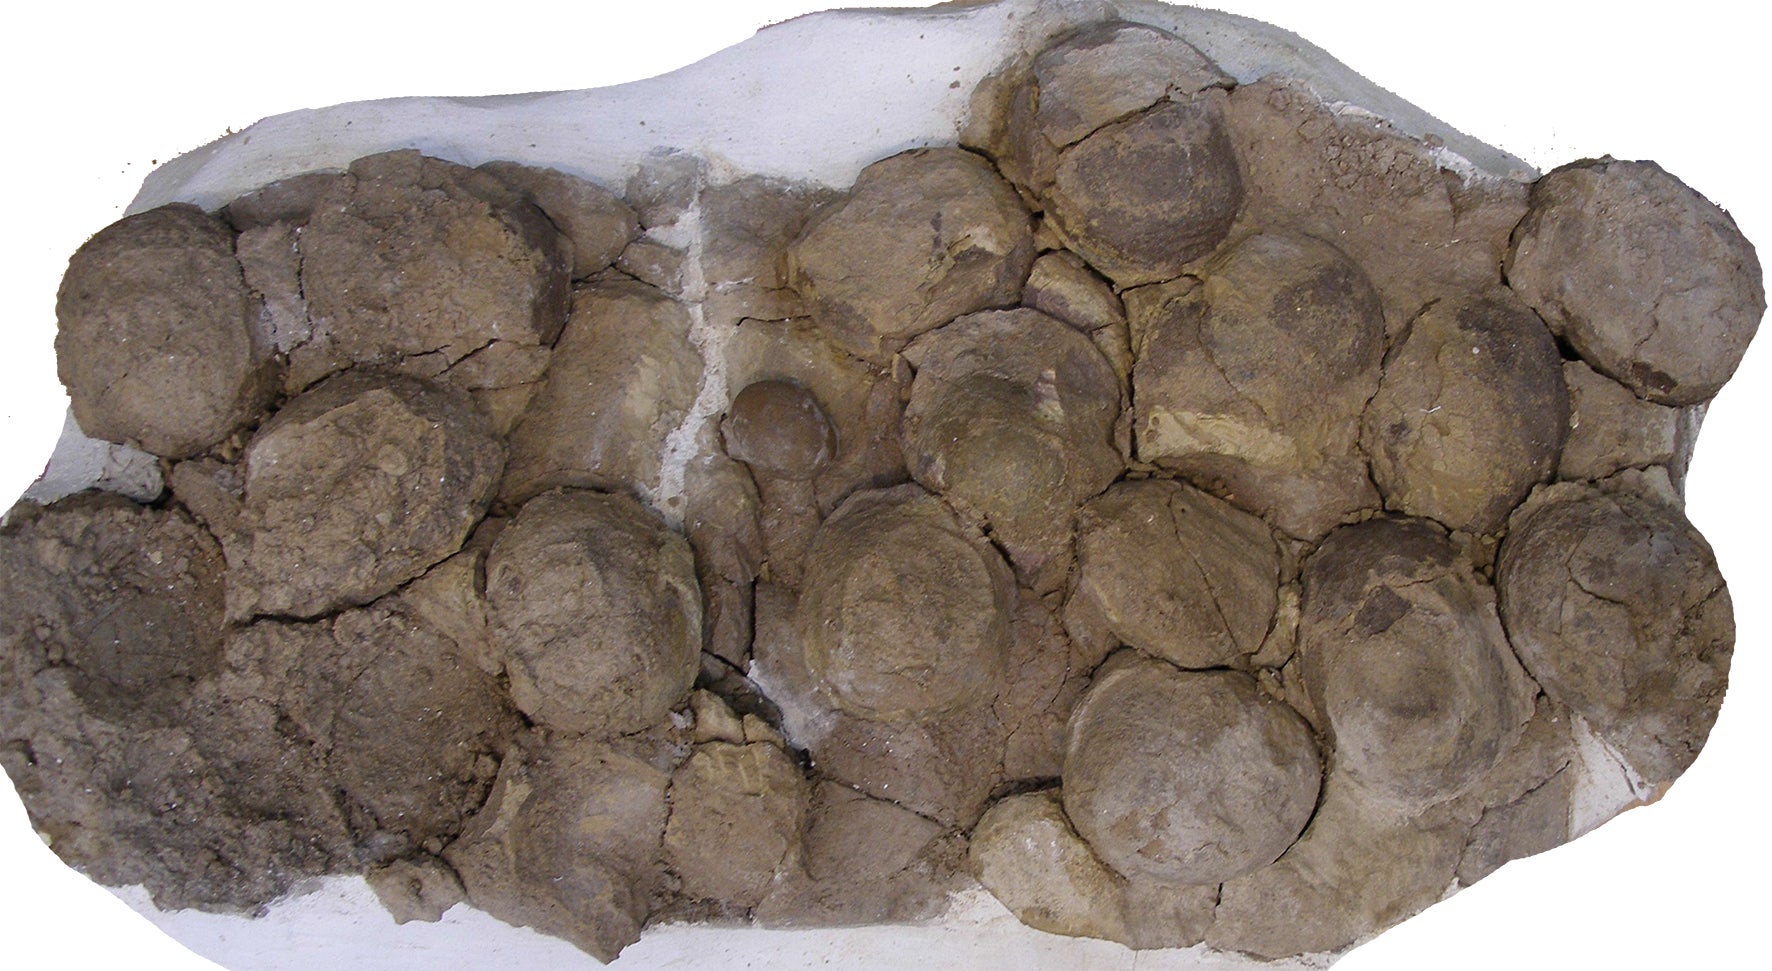 Nest with eggs of Mussaurus patagonicus. (Image: Diego Pol)